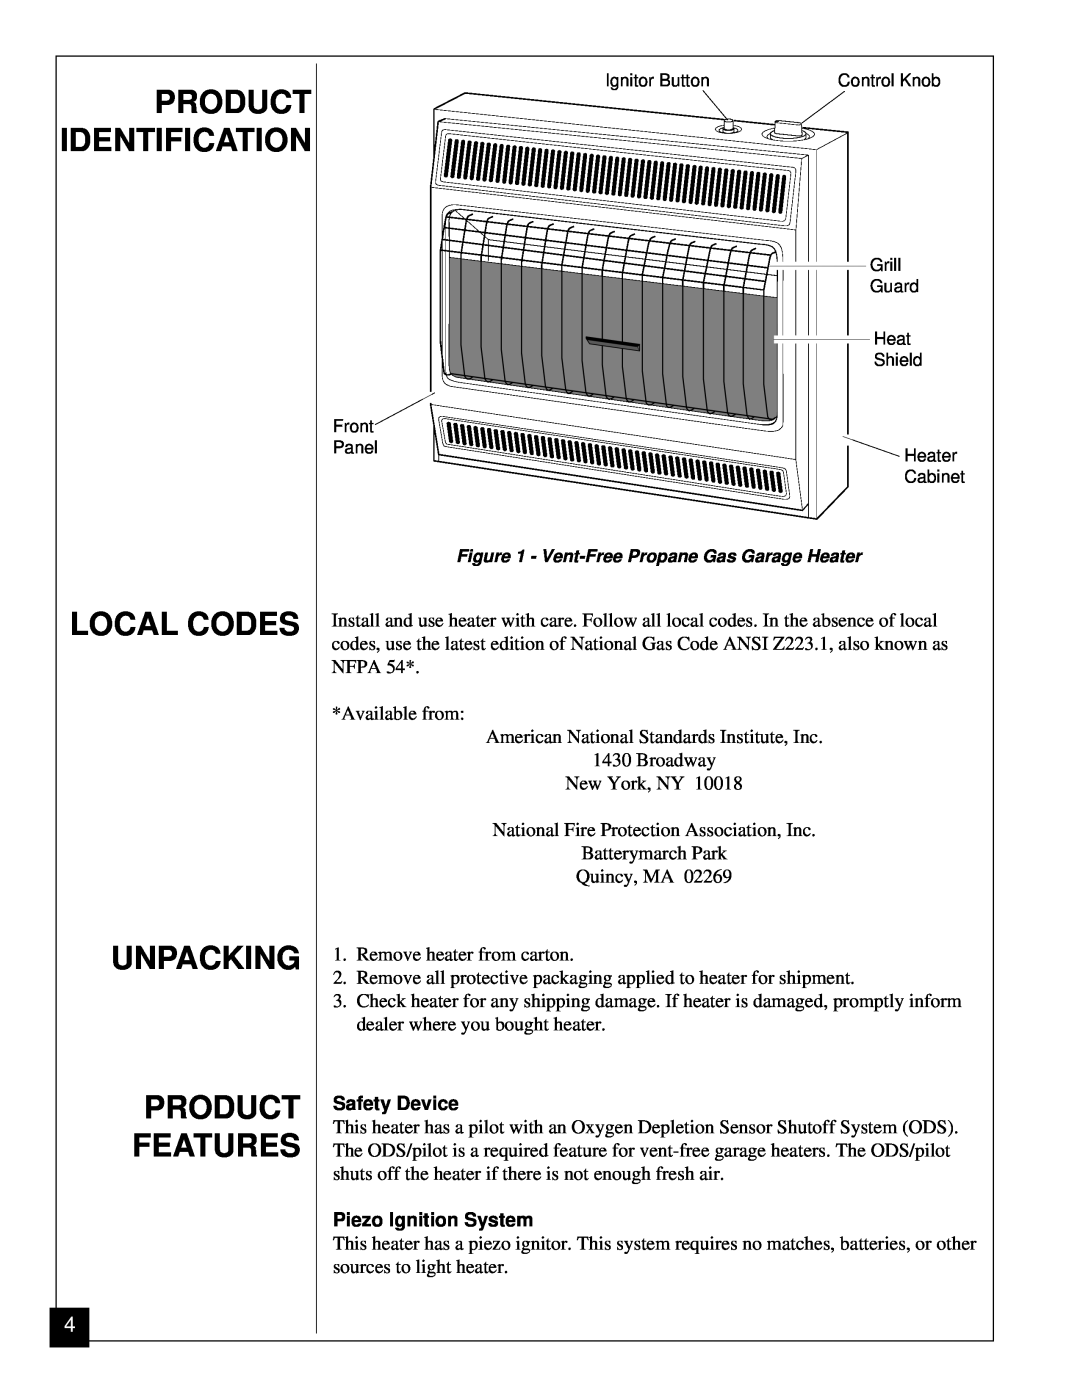 Desa VGP30 installation manual Local Codes Unpacking Product Features, Product Identification 